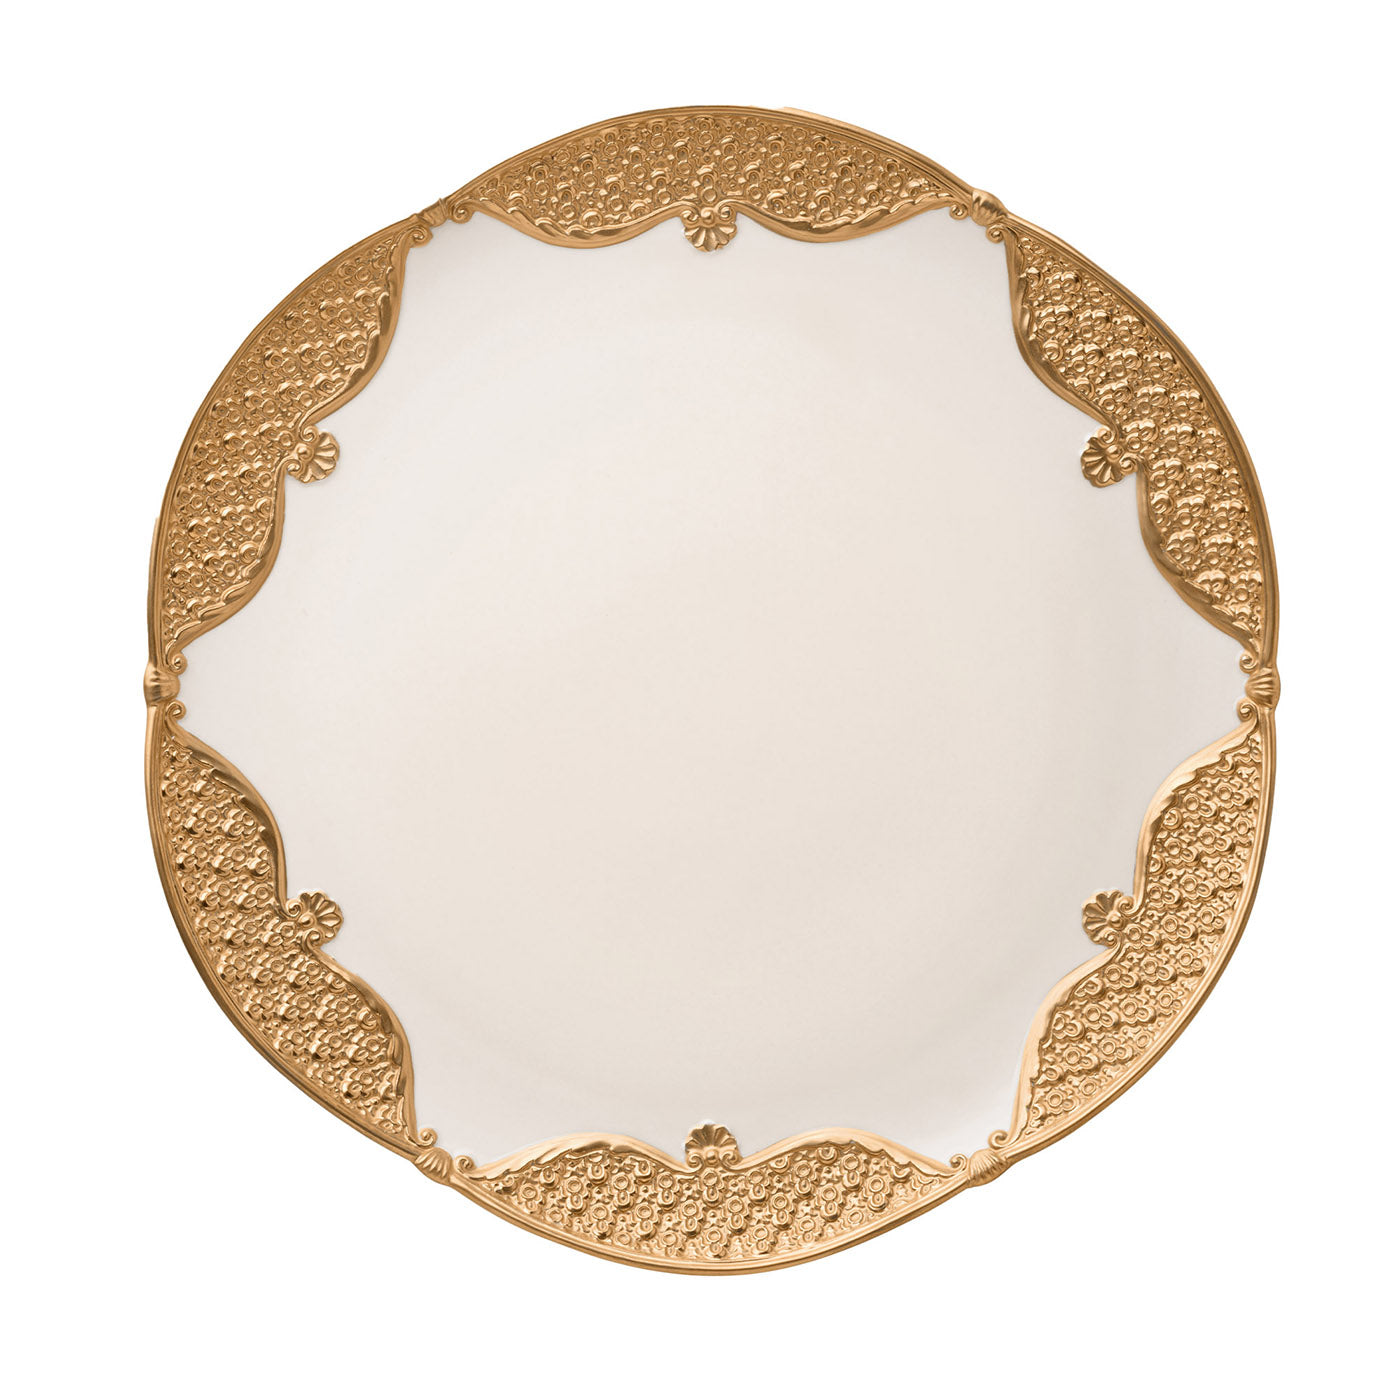 Caterina Set of 2 White & Gold Serving Plates - Main view